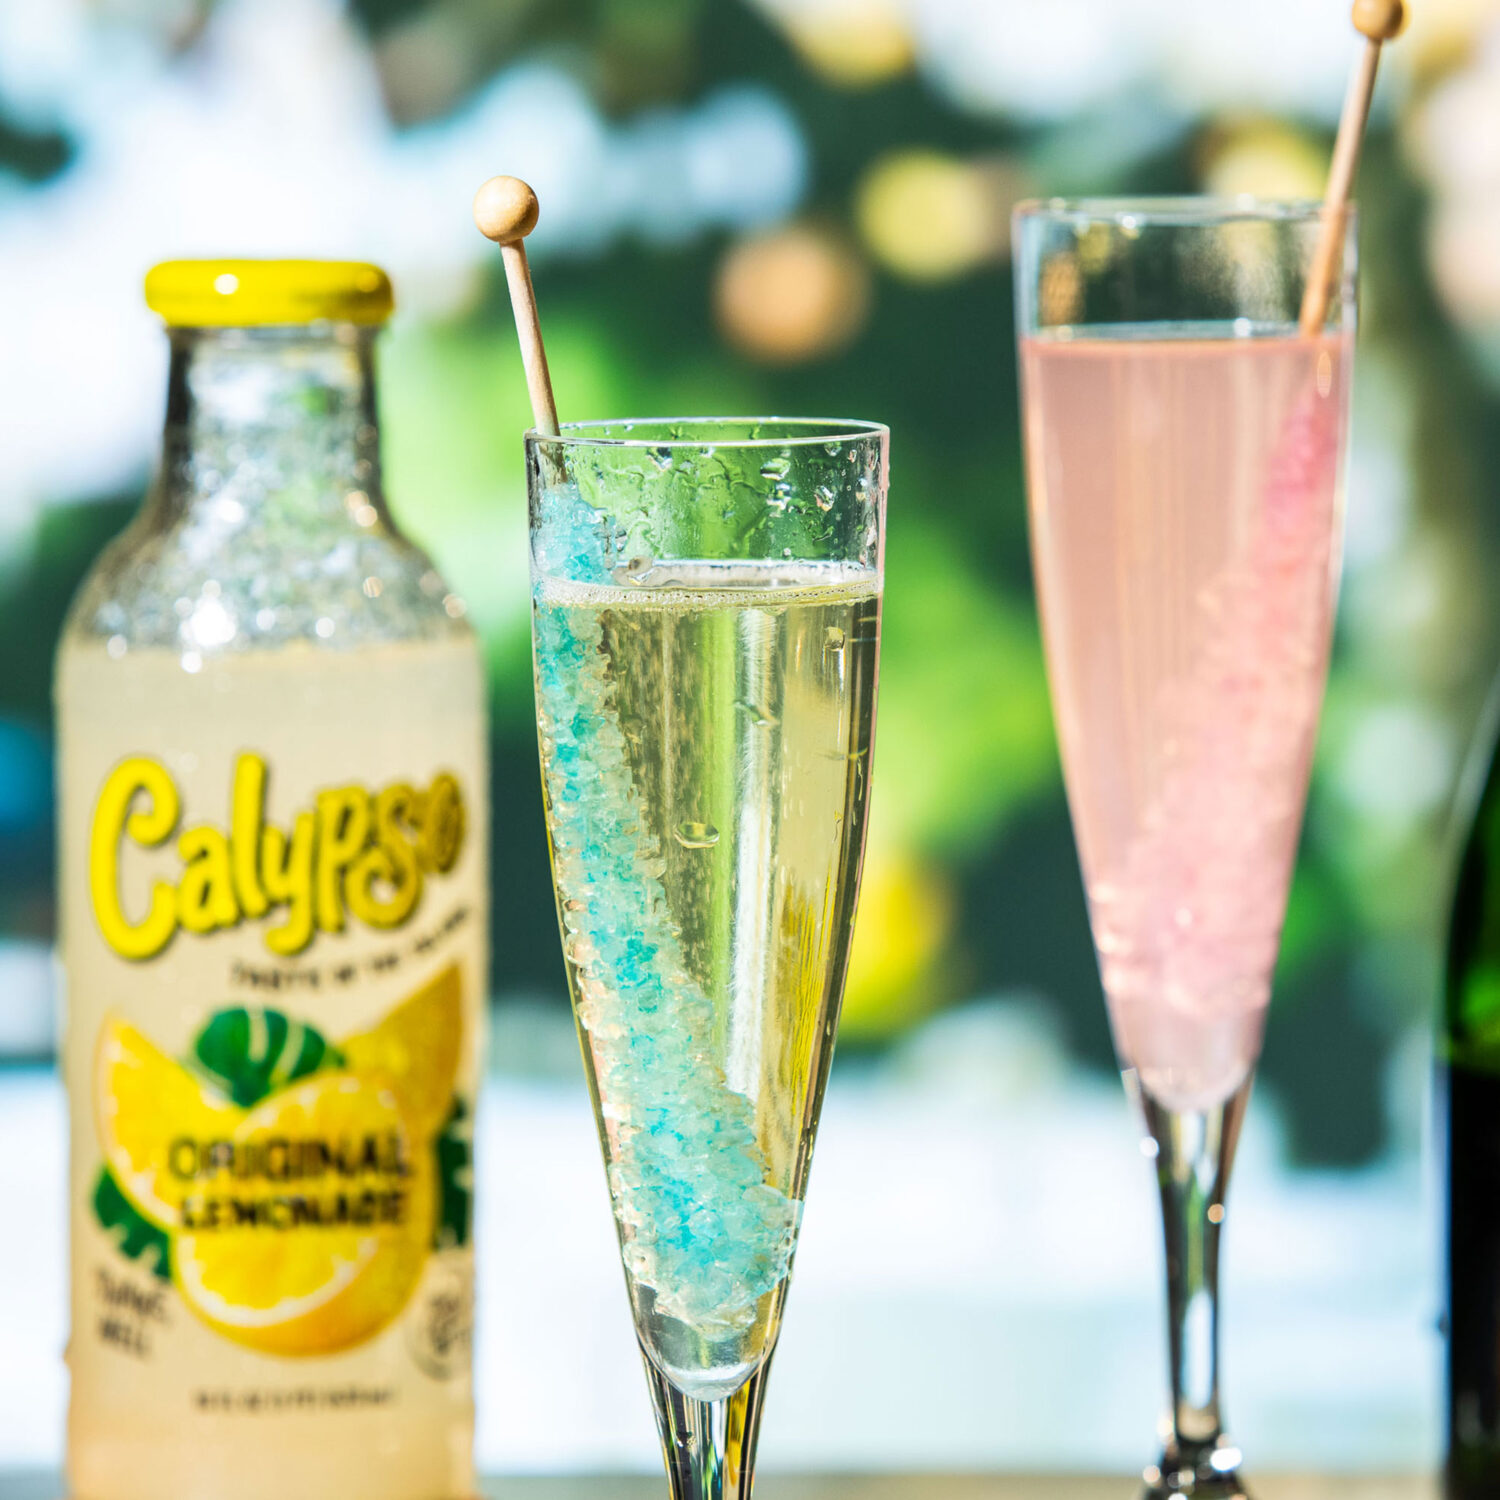 A glass of champagne and rock candy next to a bottle of Calypso Original Lemonade.